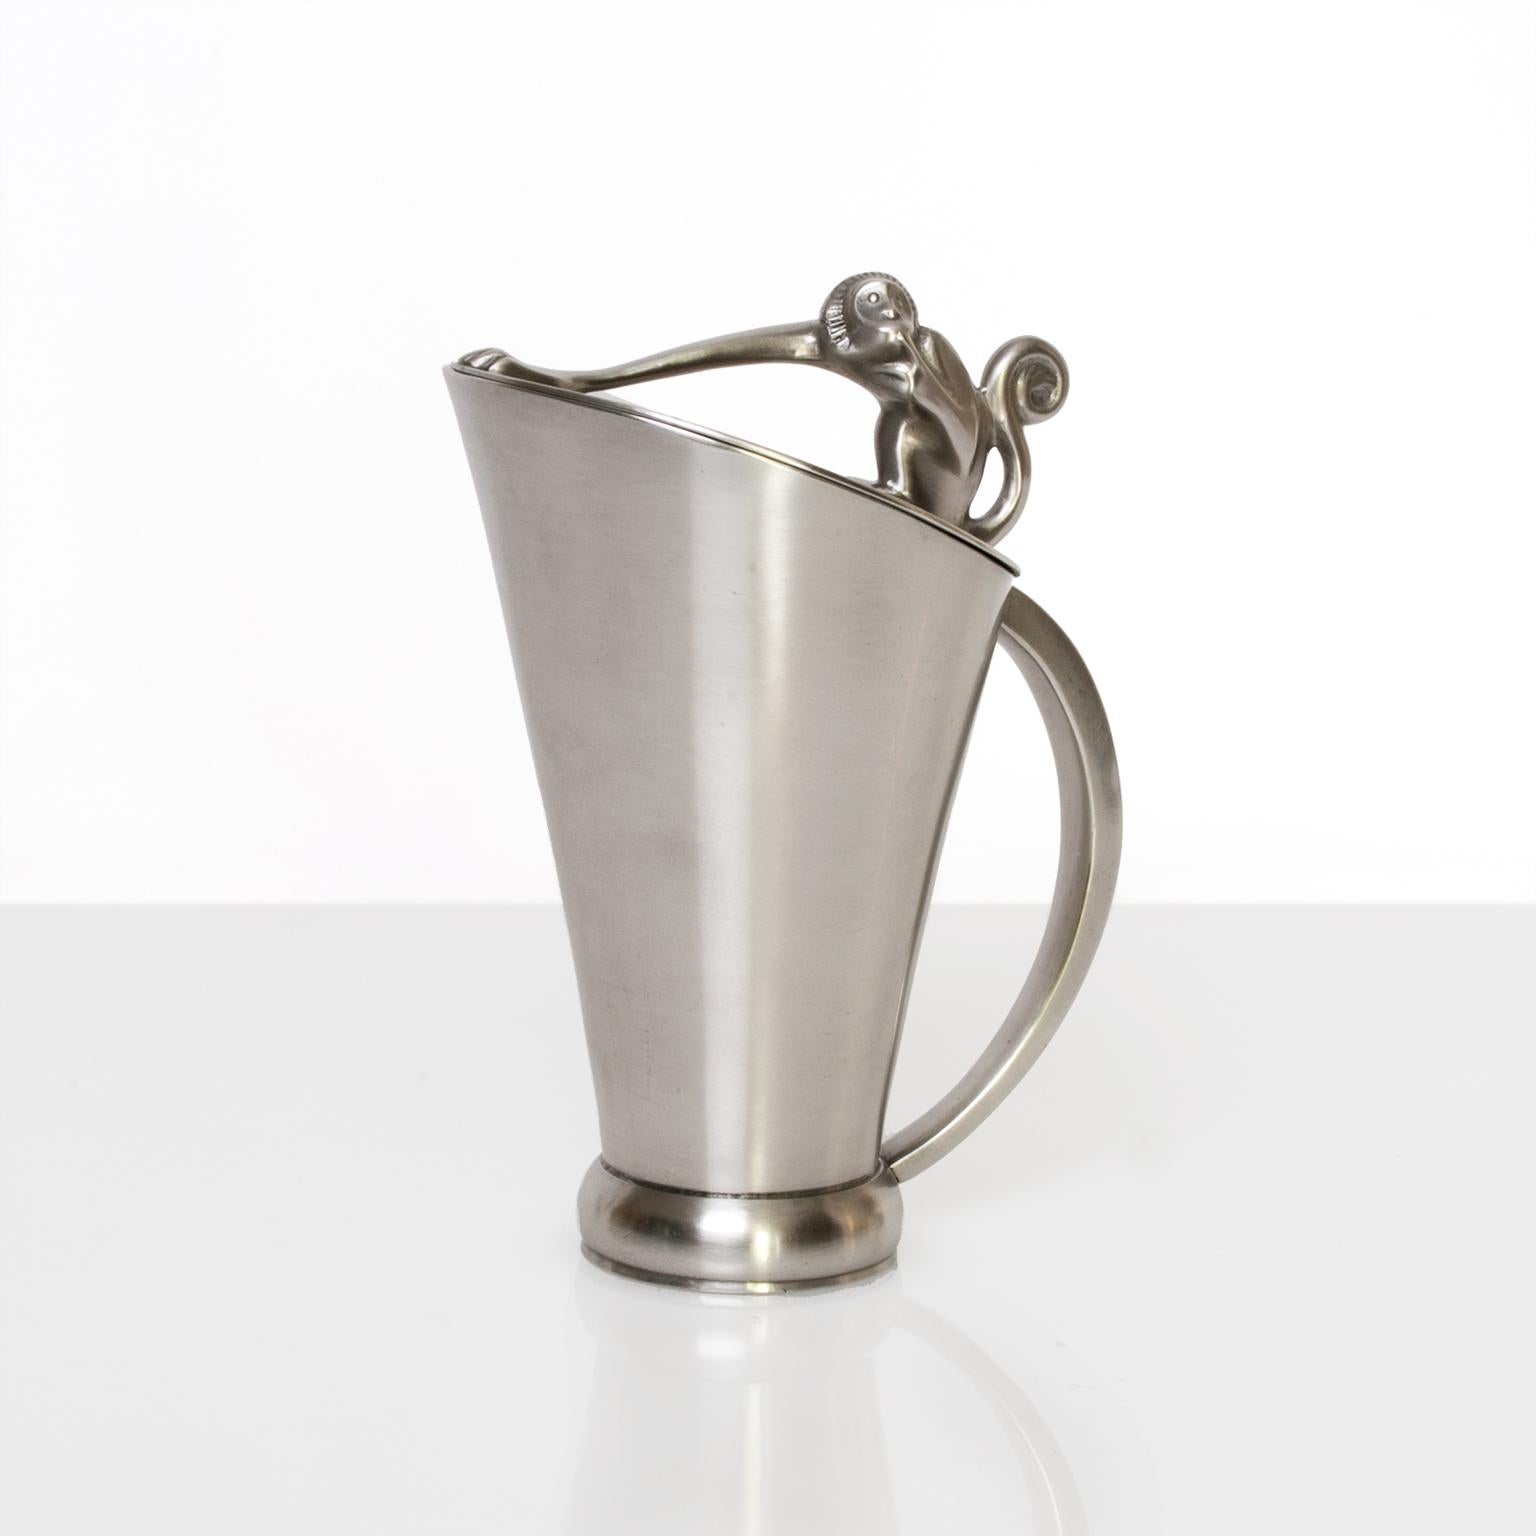 Swedish Art Deco solid pewter pitcher with a figure of a monkey sitting atop the lid, his outstretched arm serves as a handle. Made by GAB (Guldsmedsaktiebolaget) and stamped G8 (1933) made in Stockholm.
Measures: Height 16.5